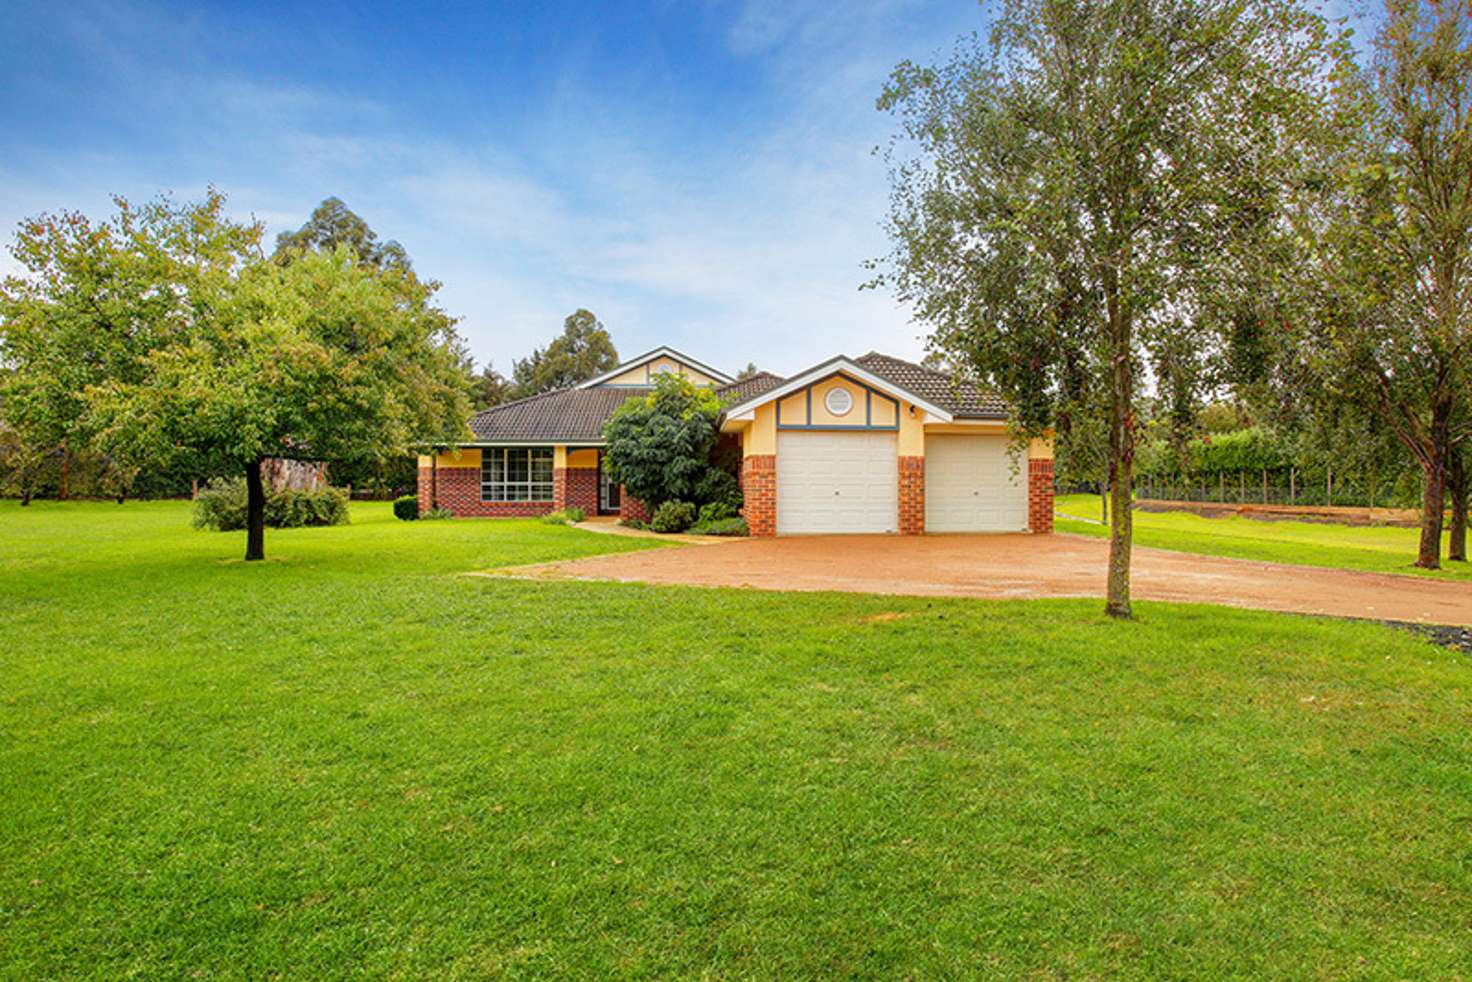 Main view of Homely house listing, 16 Stratford Way, Burradoo NSW 2576